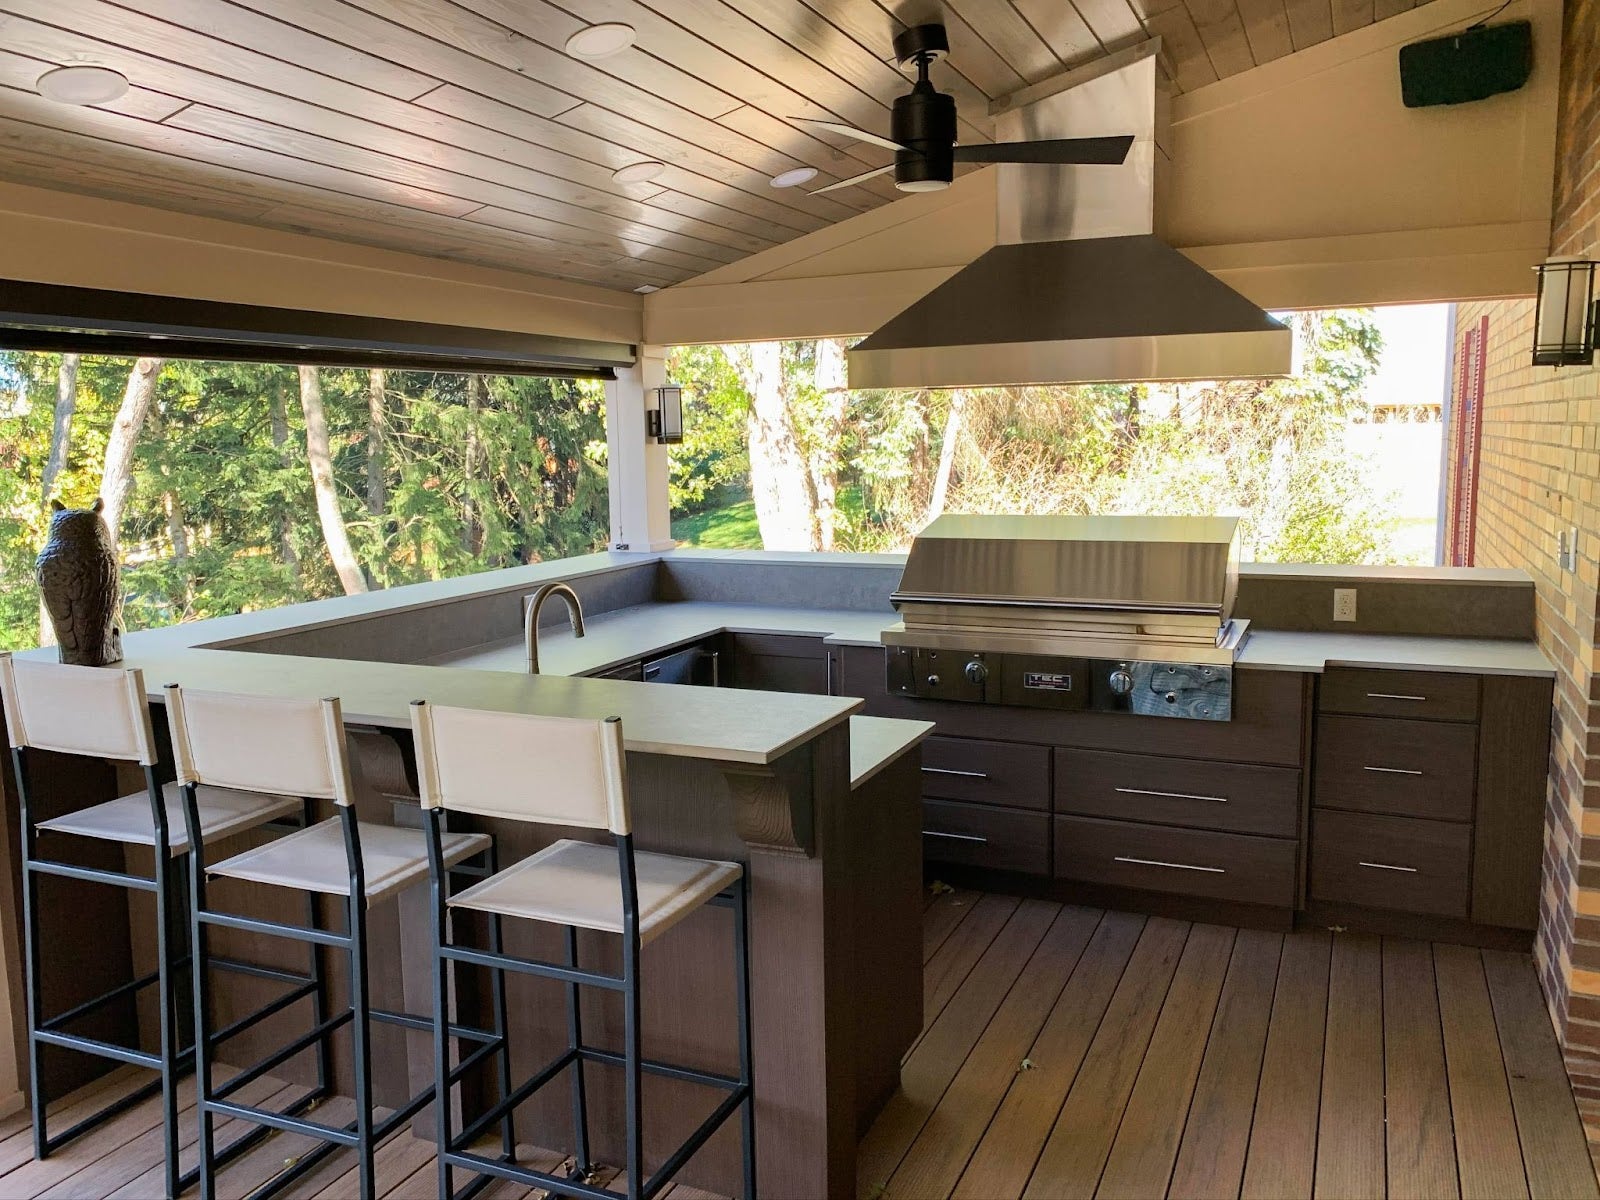 Contemporary outdoor cooking space with a built-in grill, sleek countertops, and high stools, set against a natural wooded environment.